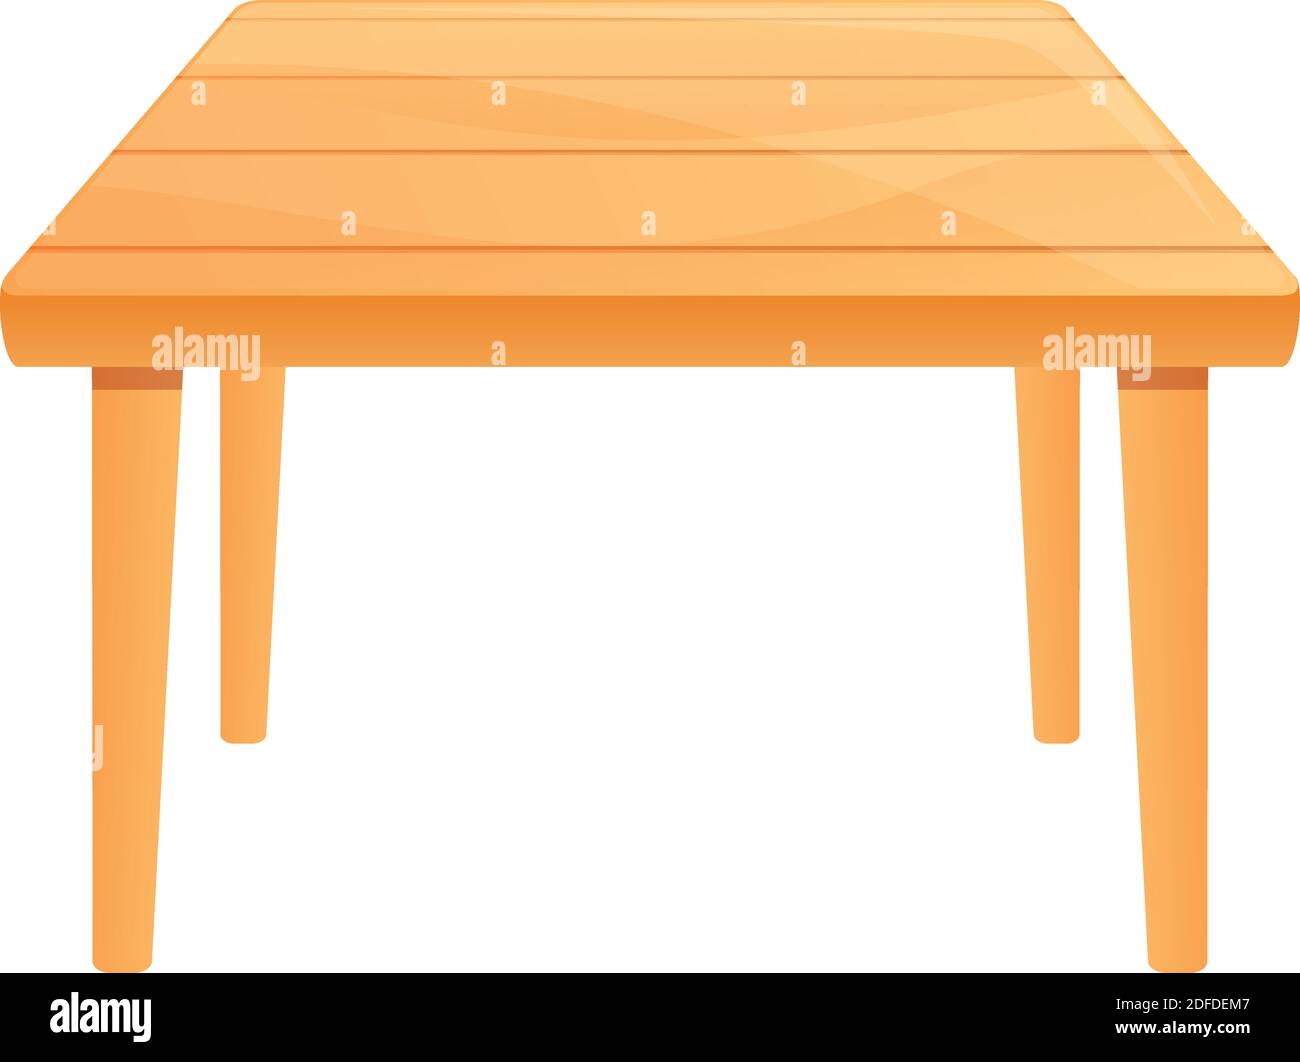 Garden Wood Table Icon Cartoon Of Garden Wood Table Vector Icon For Web Design Isolated On White Background Stock Vector Image Art Alamy